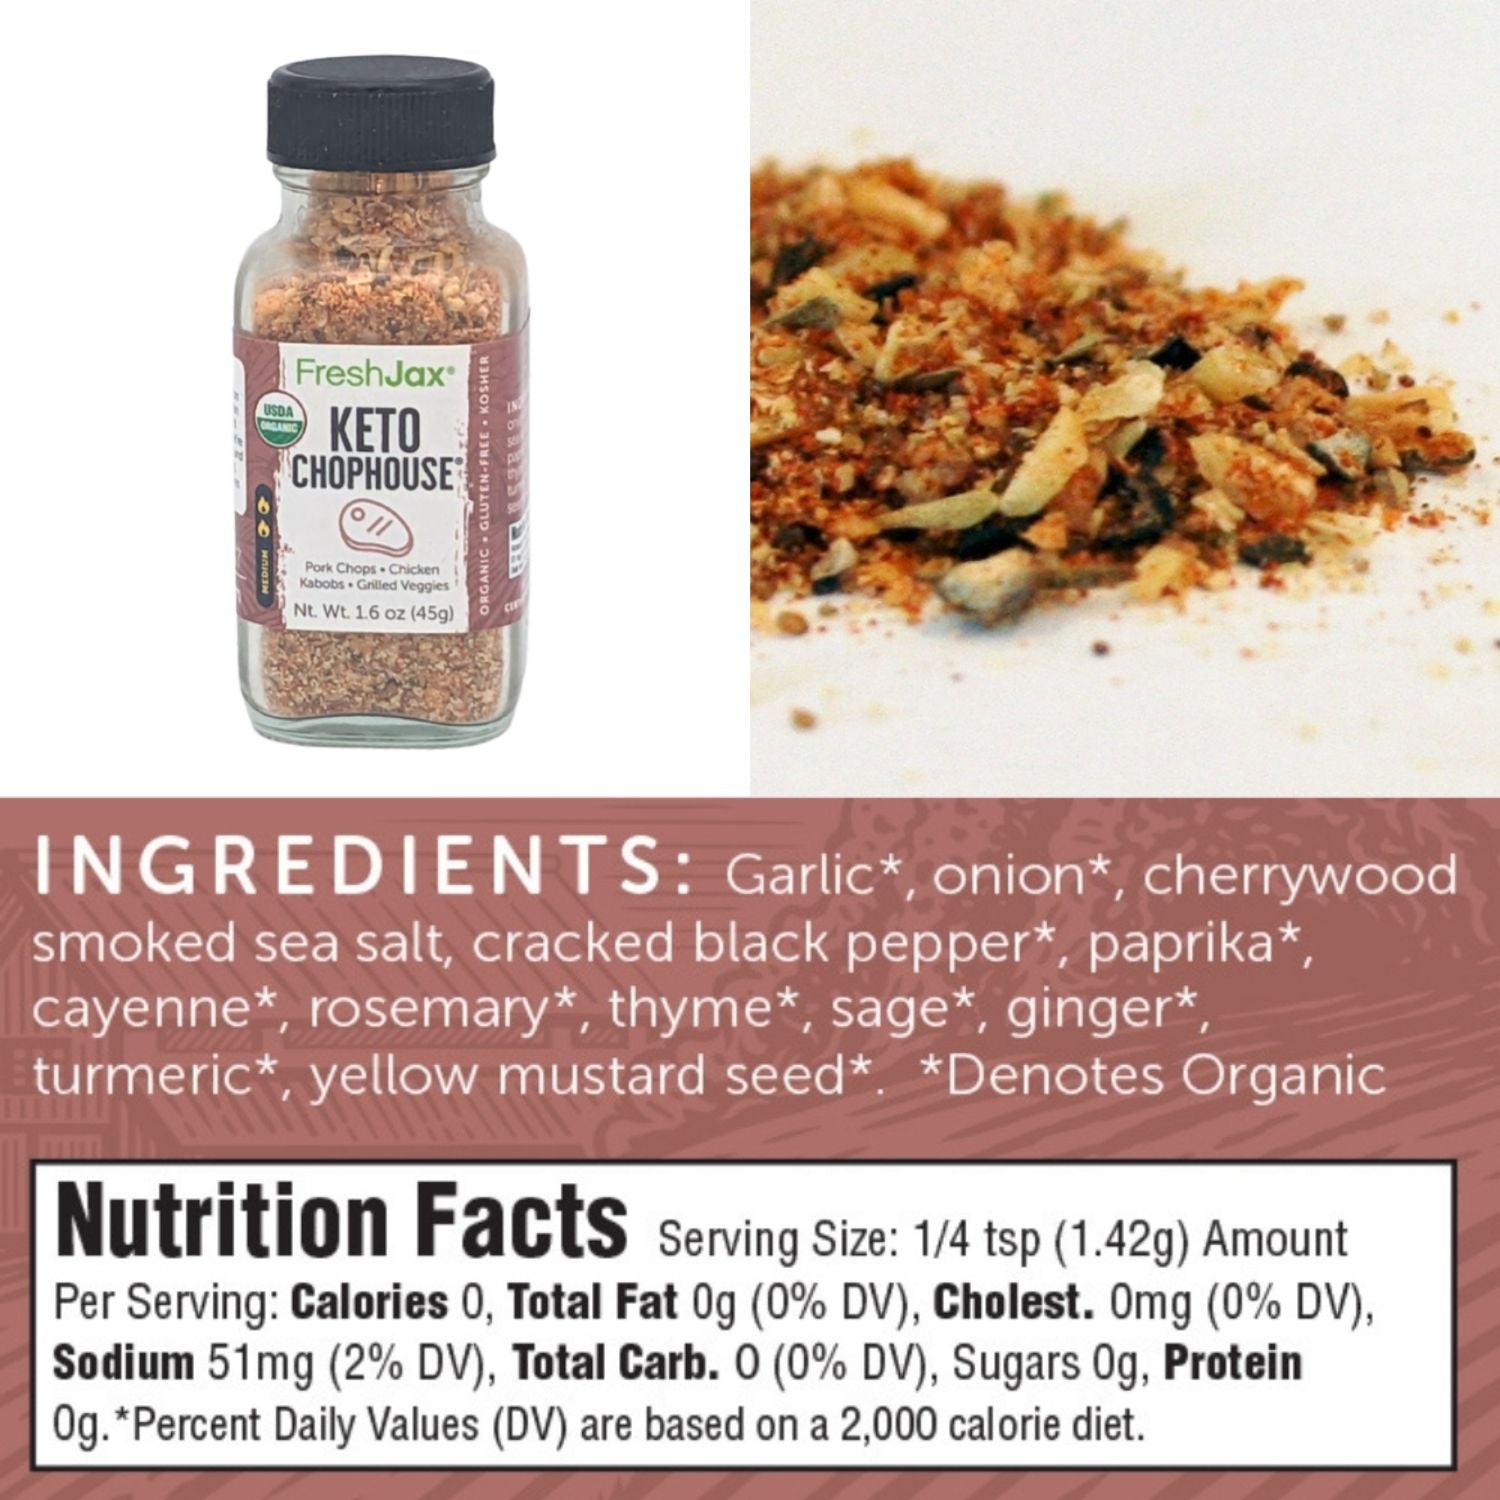 FreshJax ORganic Spices Keto Chophouse Seasoning Blend Ingredients and Nutritional Information